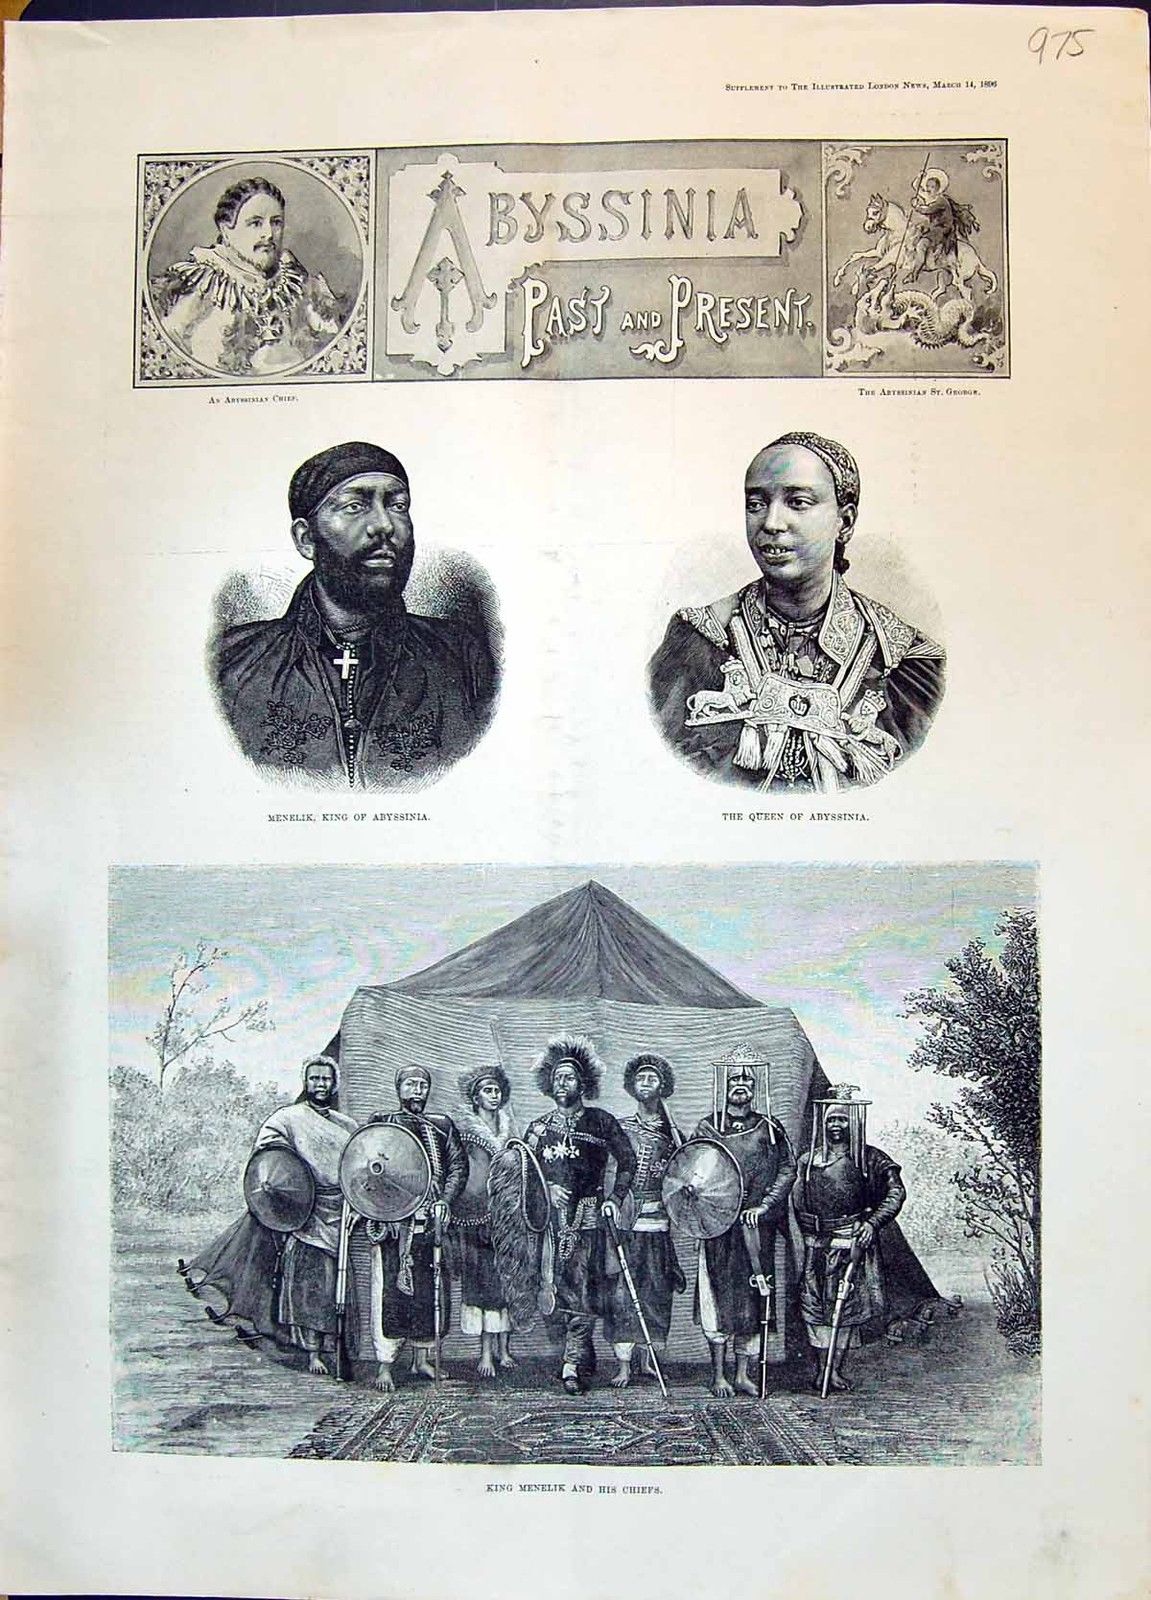 Abyssinia past and present